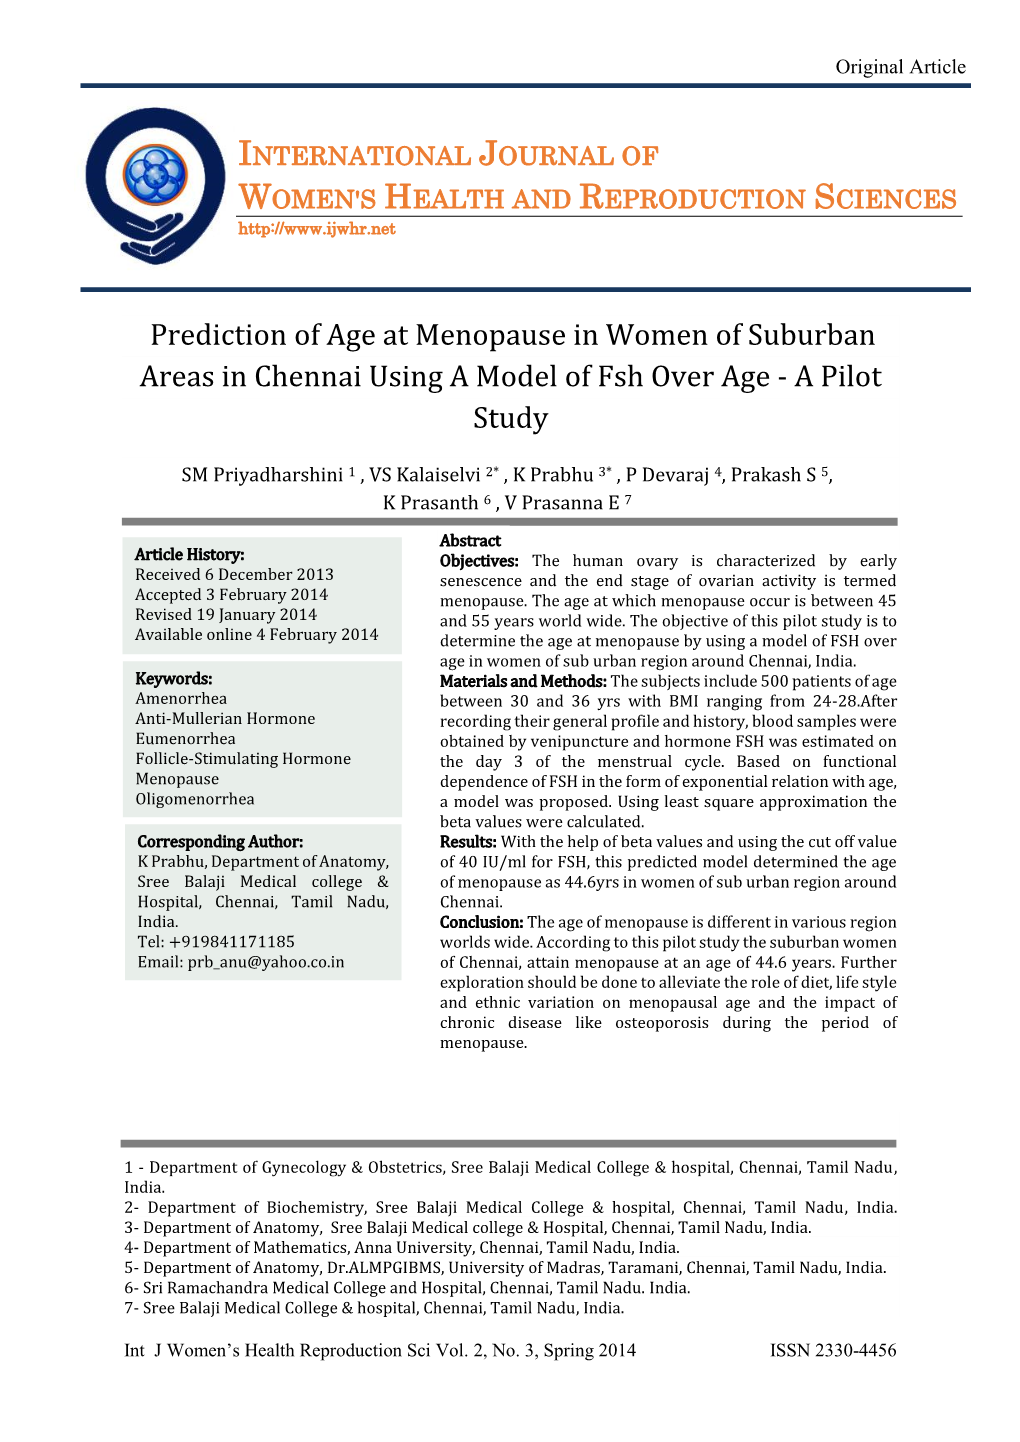 Prediction of Age at Menopause in Women of Suburban Areas in Chennai Using a Model of Fsh Over Age - a Pilot Study